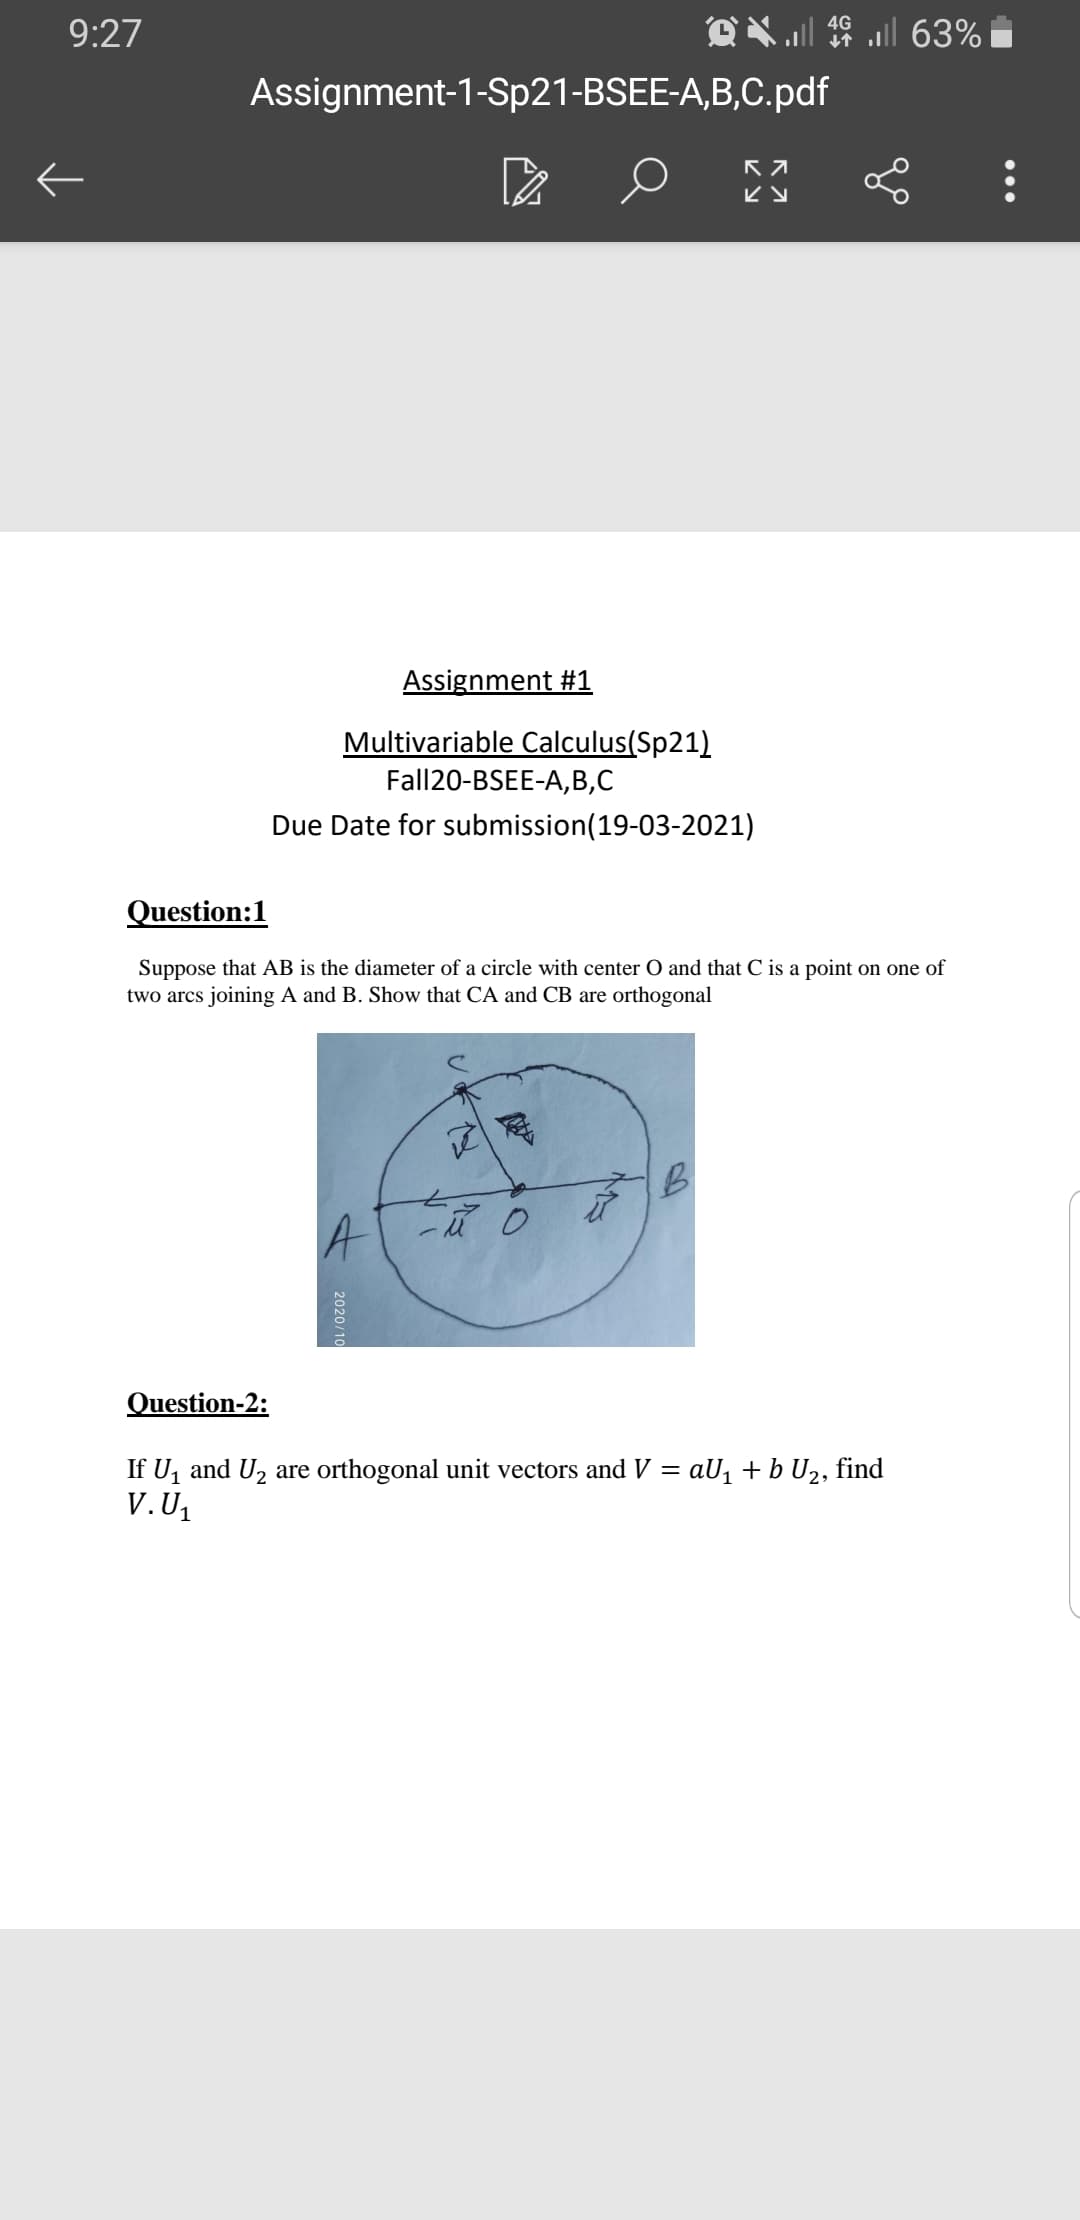 4G
9:27
Assignment-1-Sp21-BSEE-A,B,C.pdf
ビy
Assignment #1
Multivariable Calculus(Sp21)
Fall20-BSEE-A,B,C
Due Date for submission(19-03-2021)
Question:1
Suppose that AB is the diameter of a circle with center O and that C is a point on one of
two arcs joining A and B. Show that CA and CB are orthogonal
A
Question-2:
If U, and U2 are orthogonal unit vectors and V = aU1 + b U2, find
V.U1
2020/10
